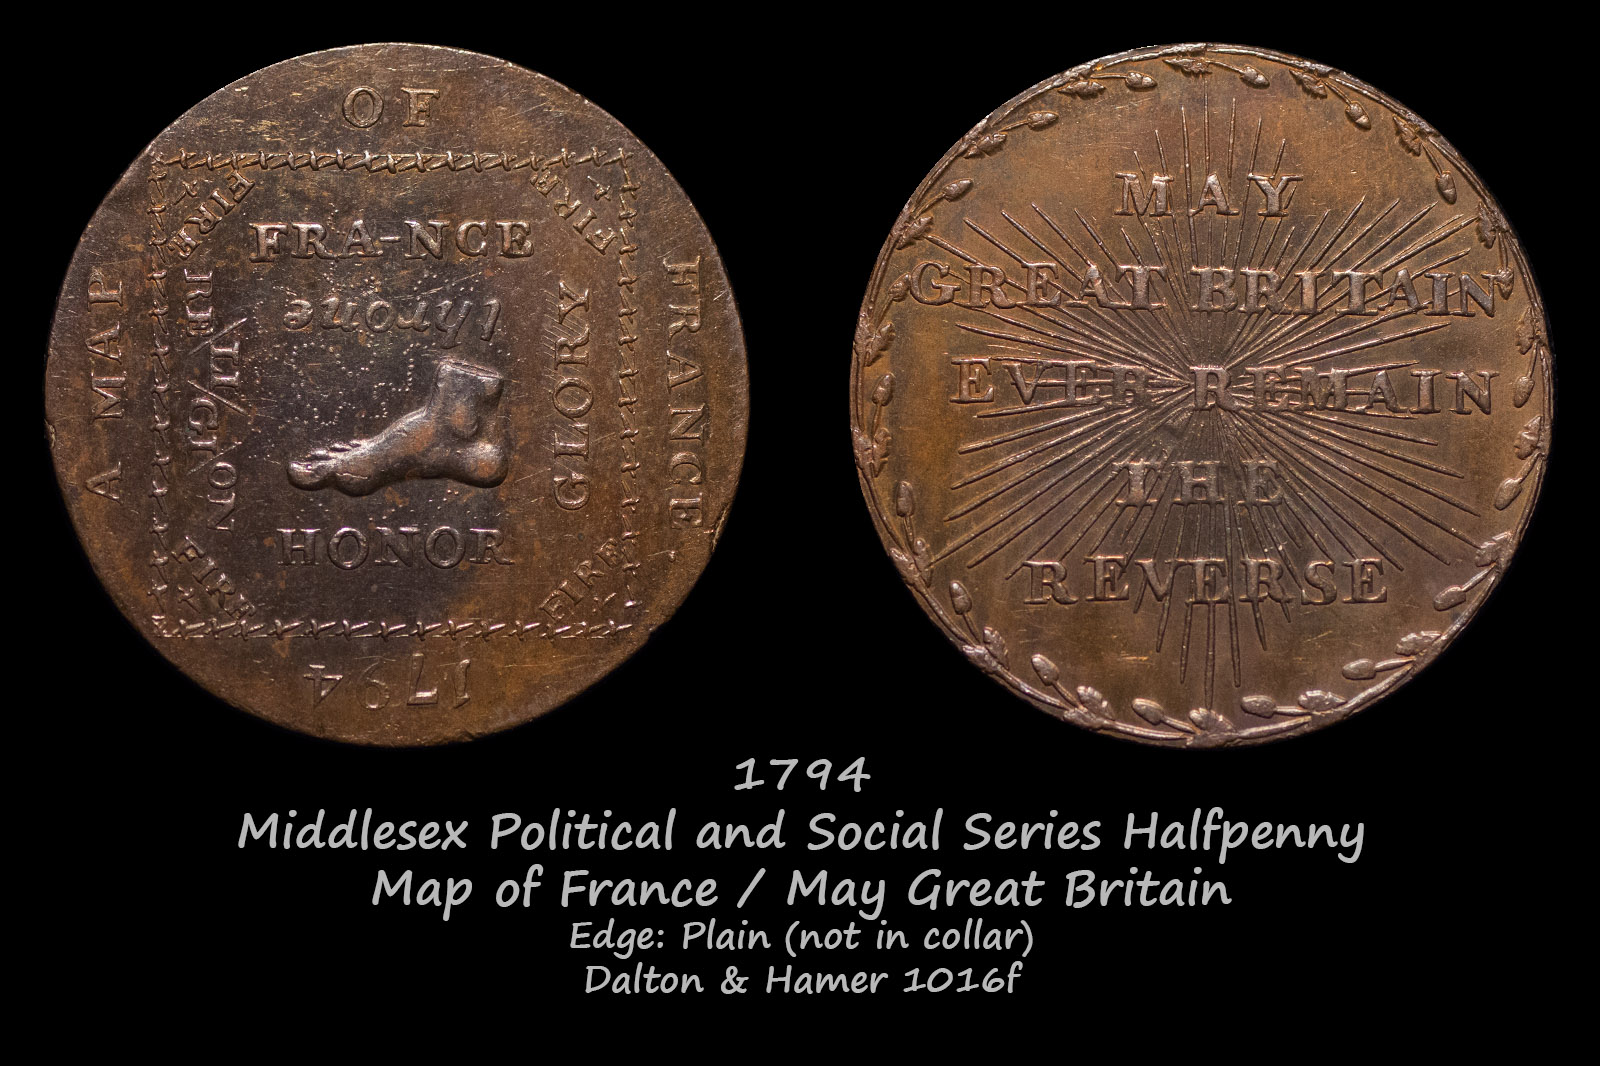 Middlesex Political and Social Series Halfpenny D&H1016f